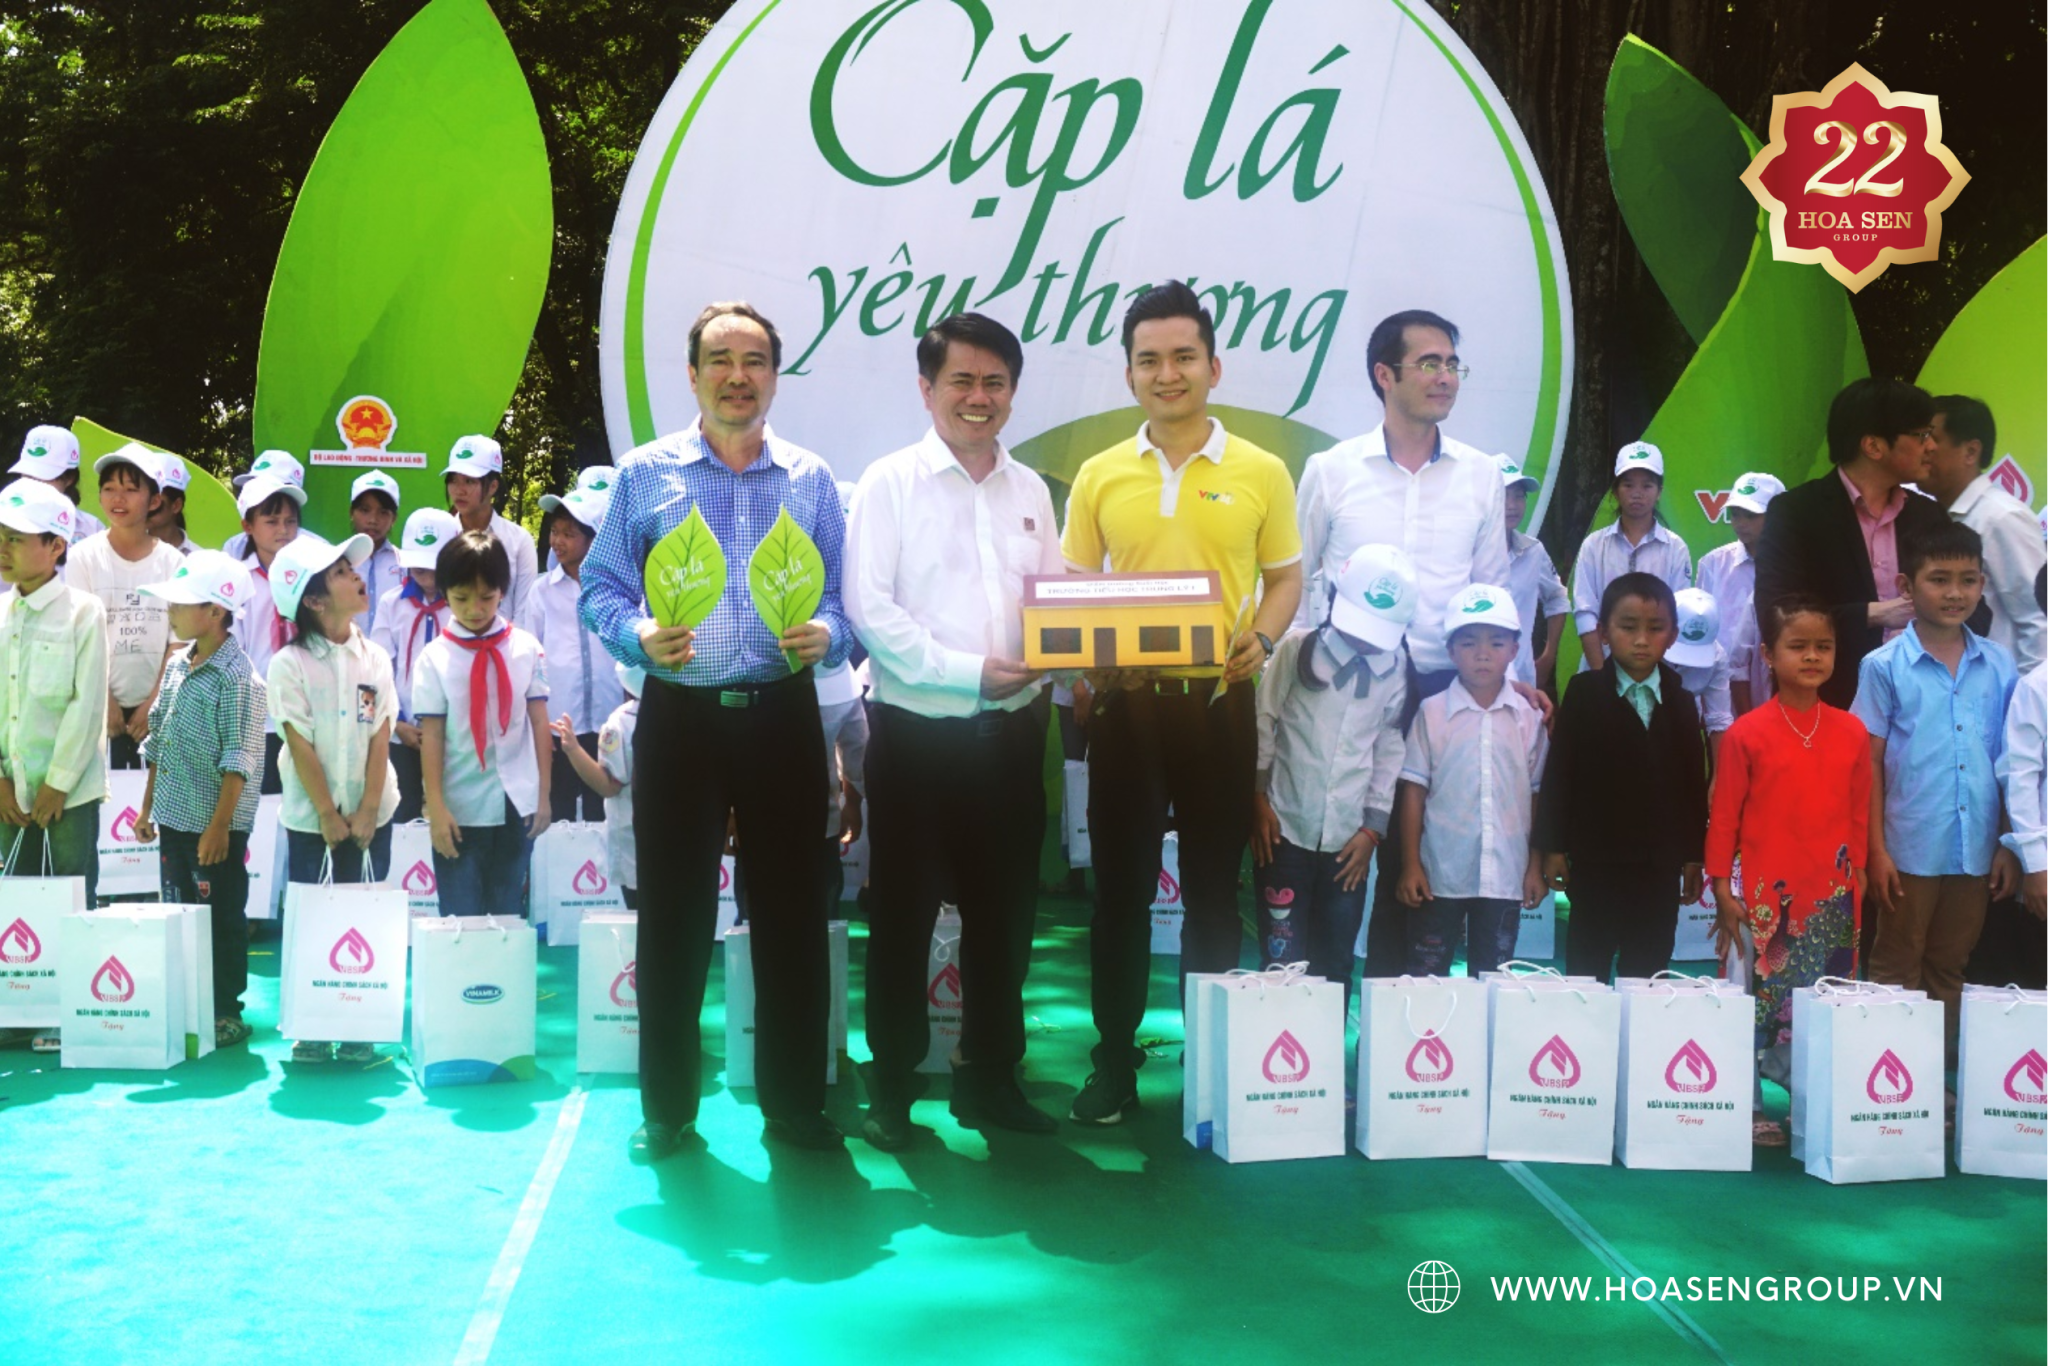 Efforts for the community help Hoa Sen Group become a trusted brand